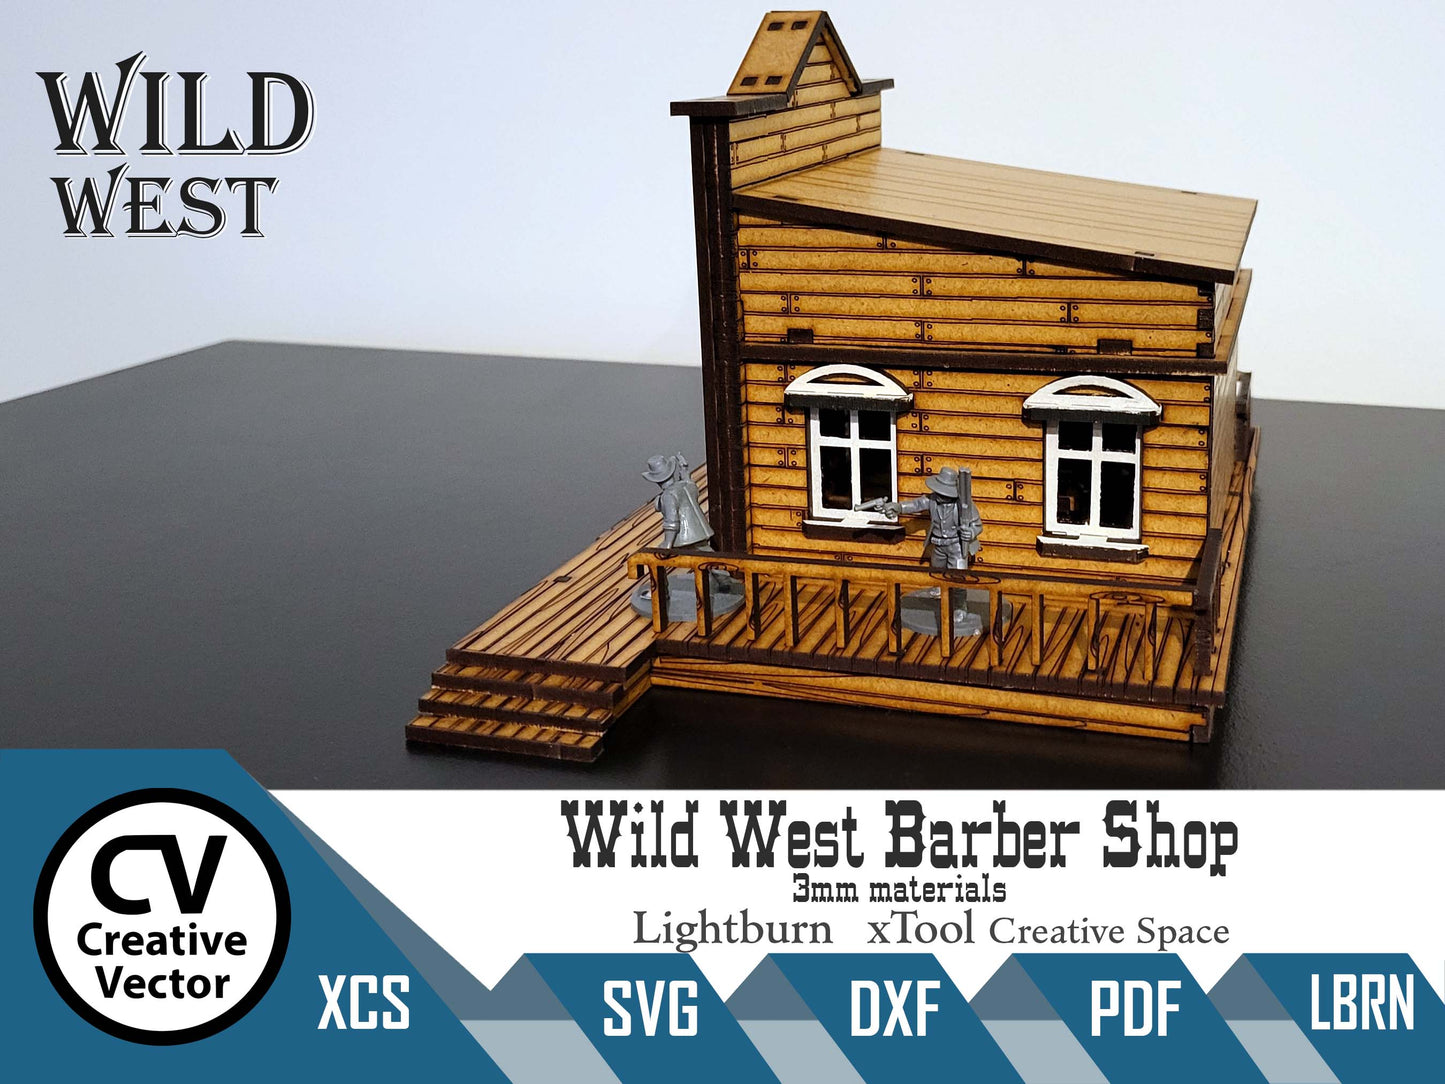 Wild West Barber Shop in scale 28mm for Wargamers